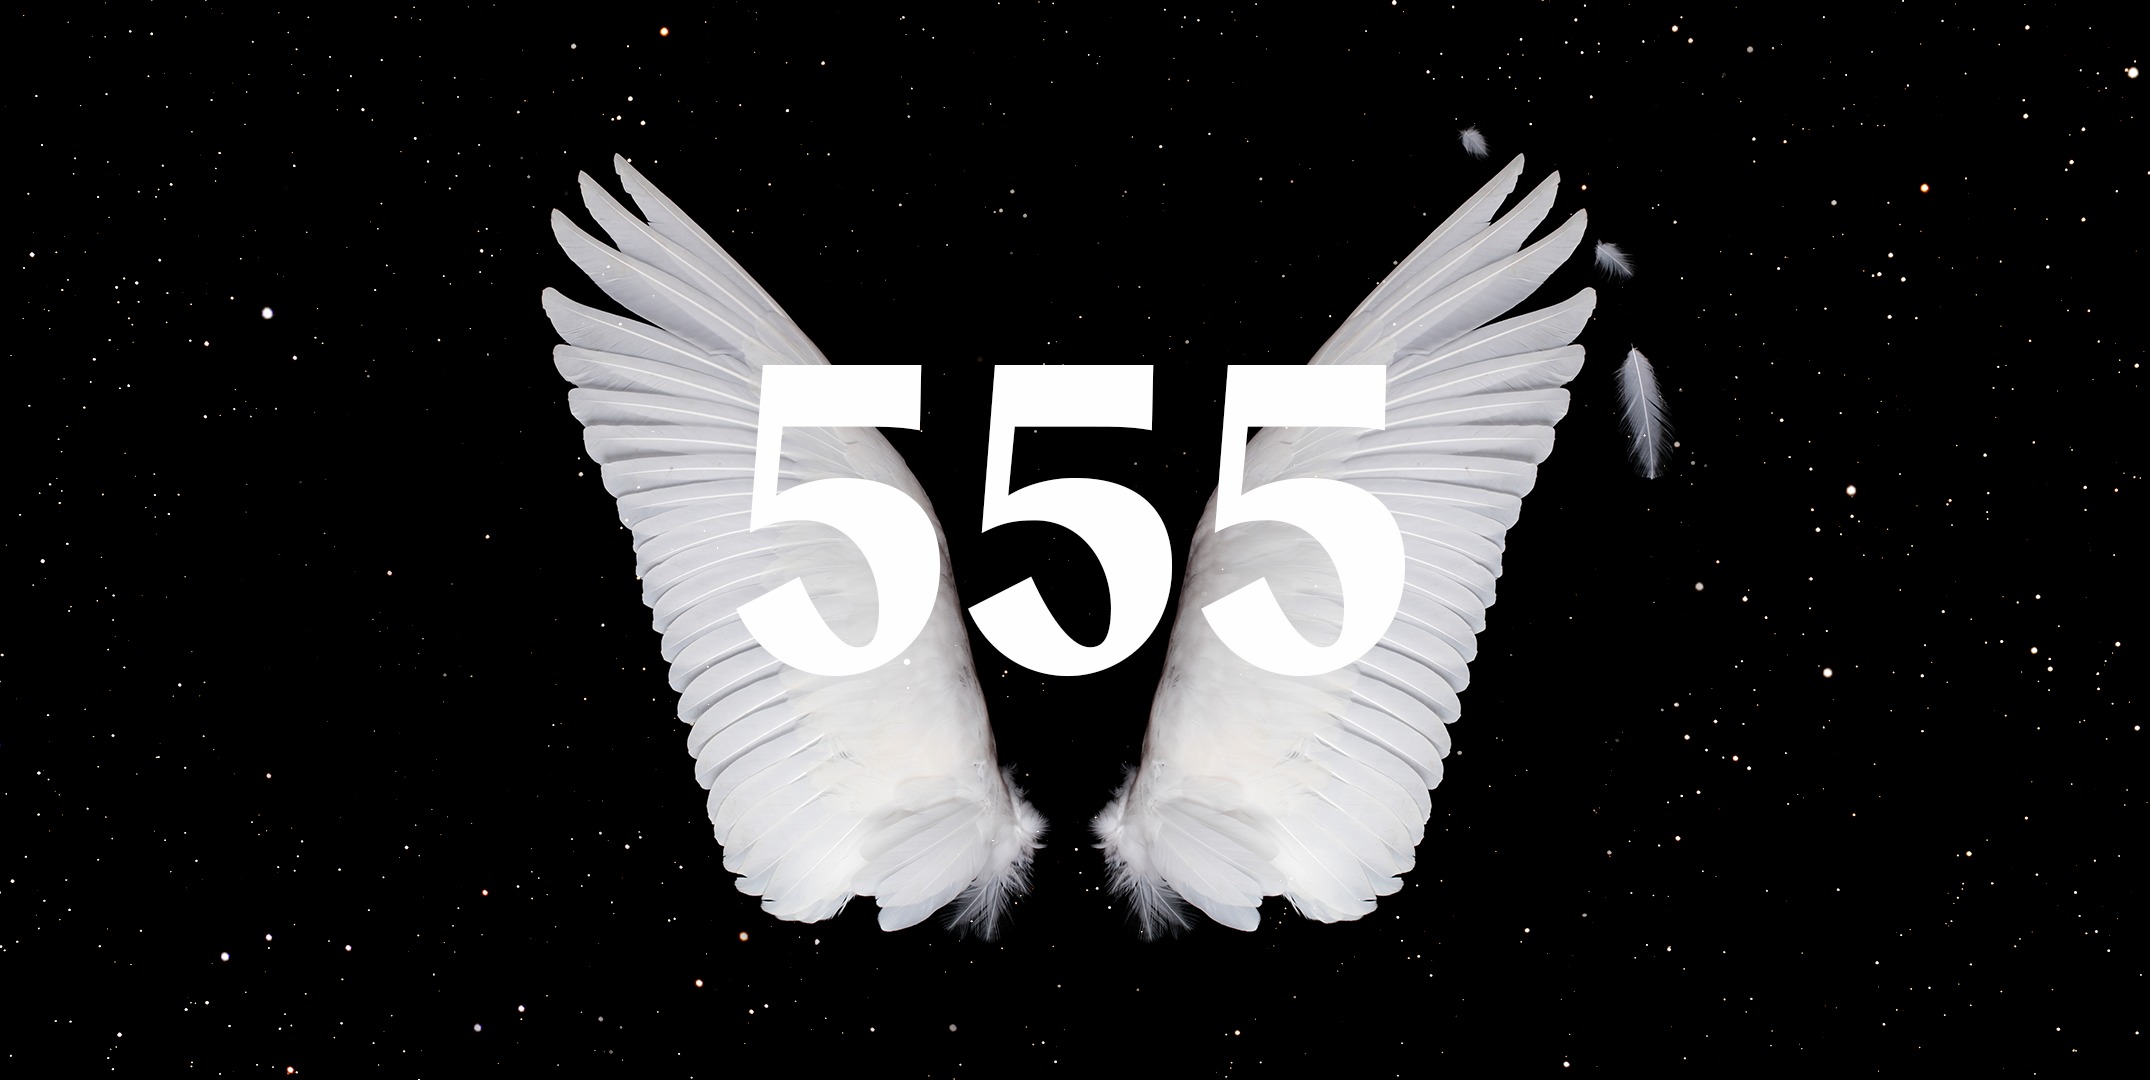 Why Do I Keep Seeing The Angel Number 555?